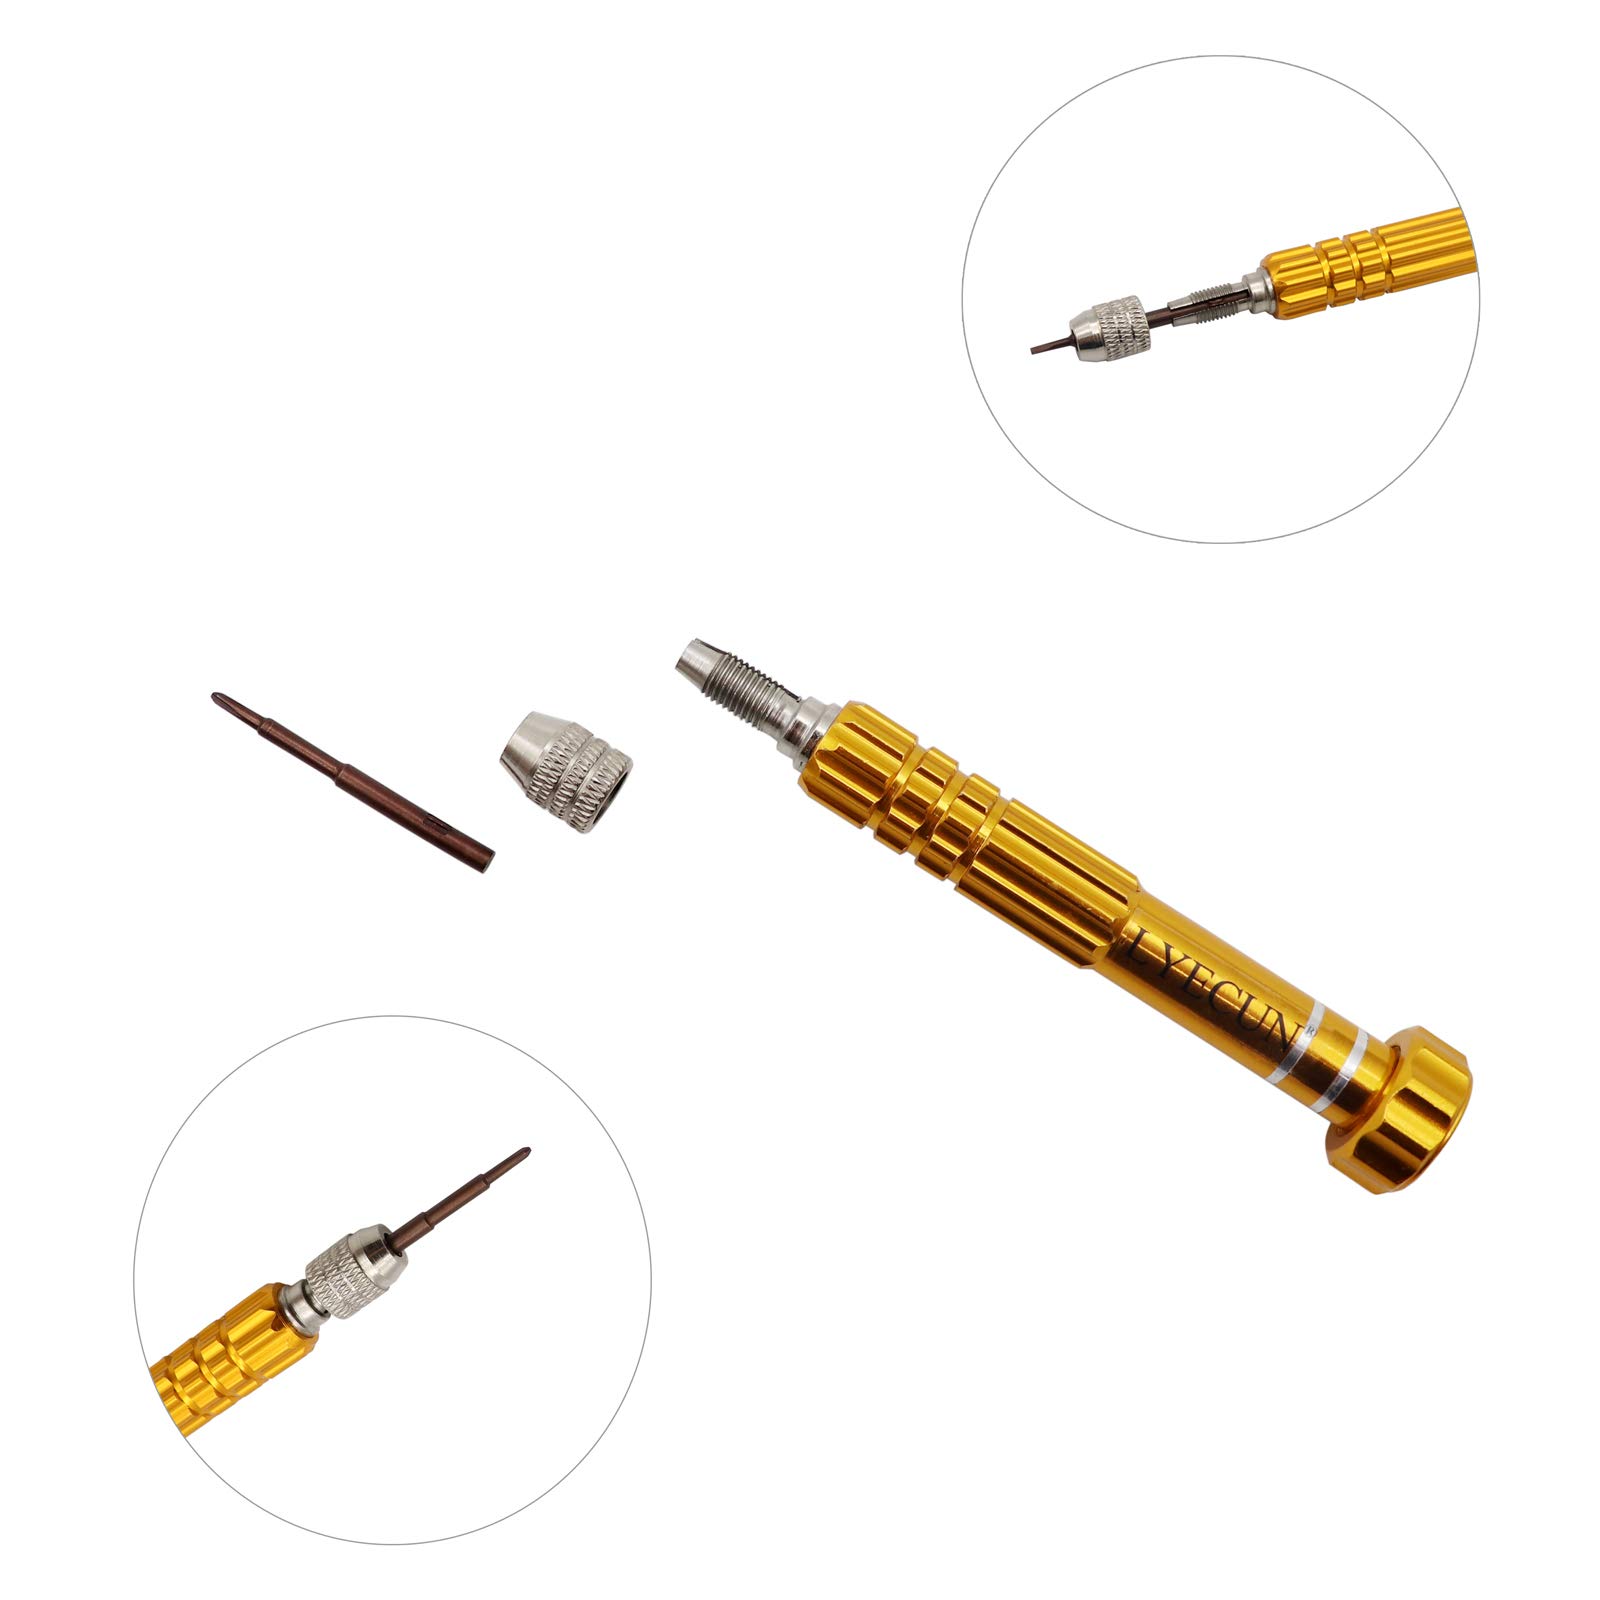 5-in-1 Multifunctional Screwdriver, Glasses Screwdriver, Optical Screwdriver, Mini Phillips Screwdriver for Electronics, Eyeglasses, Computer, Toy